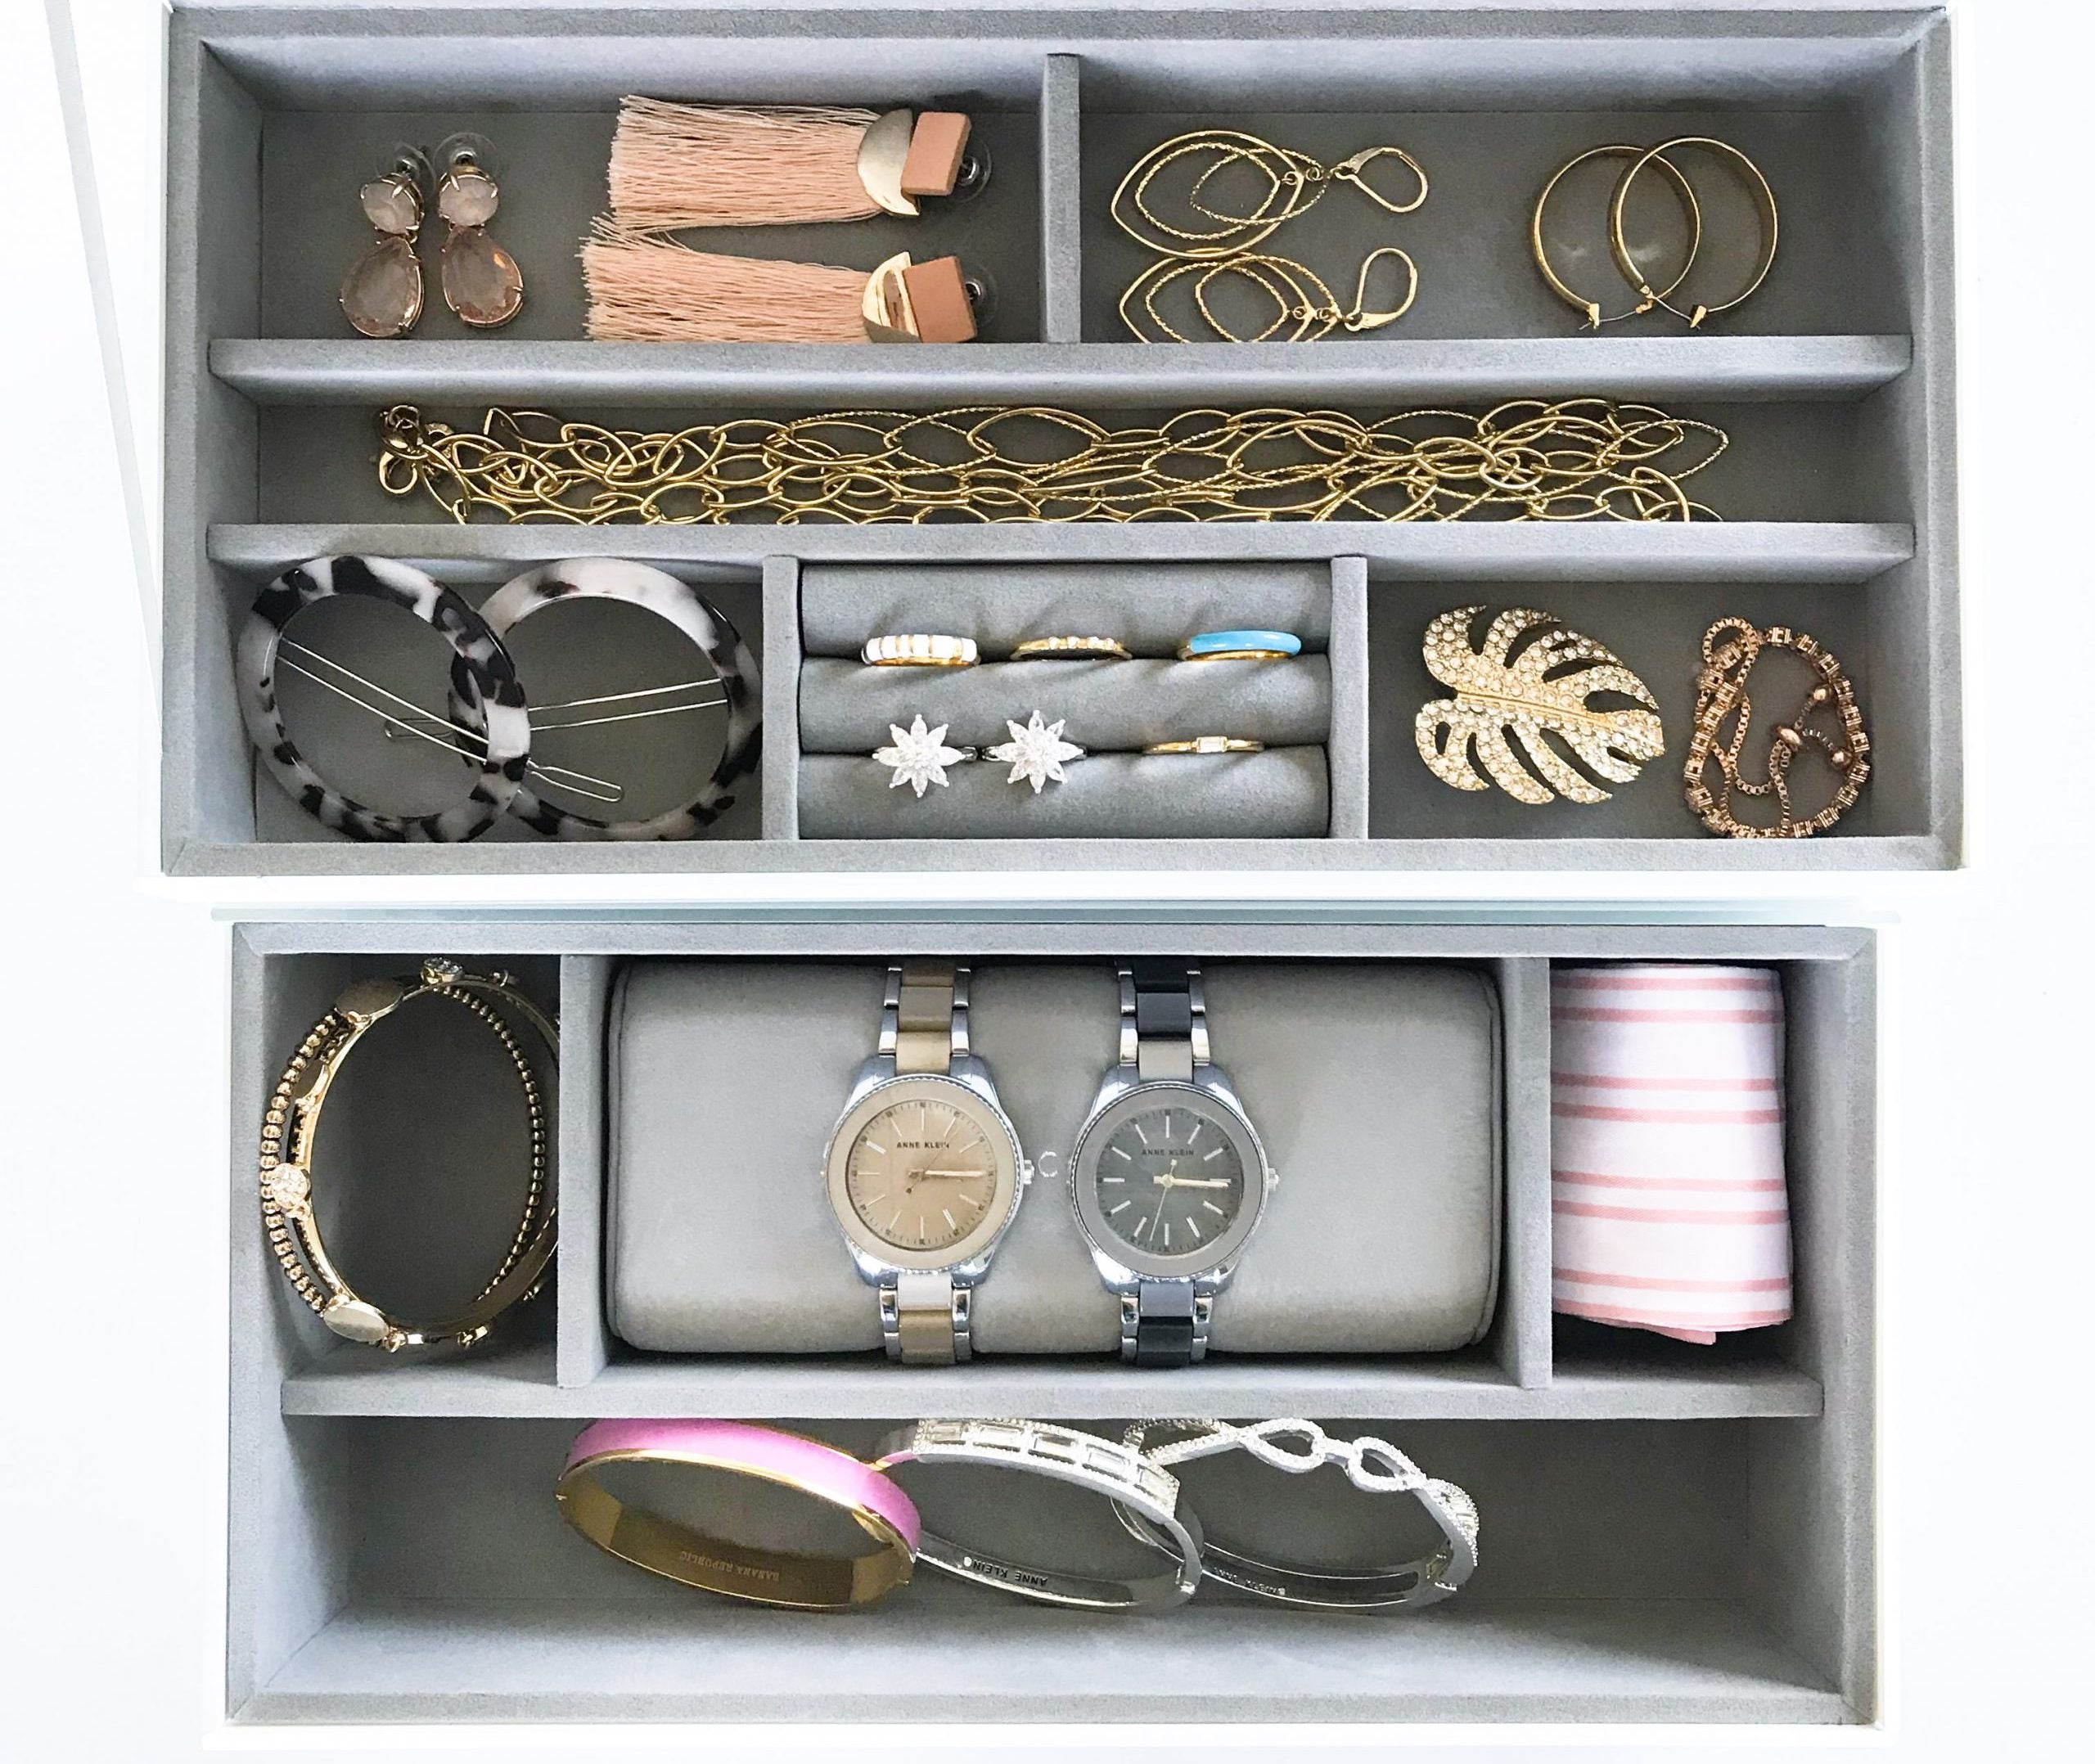 How Can Jewelry Boxes Help Keep My Jewelry Organized?